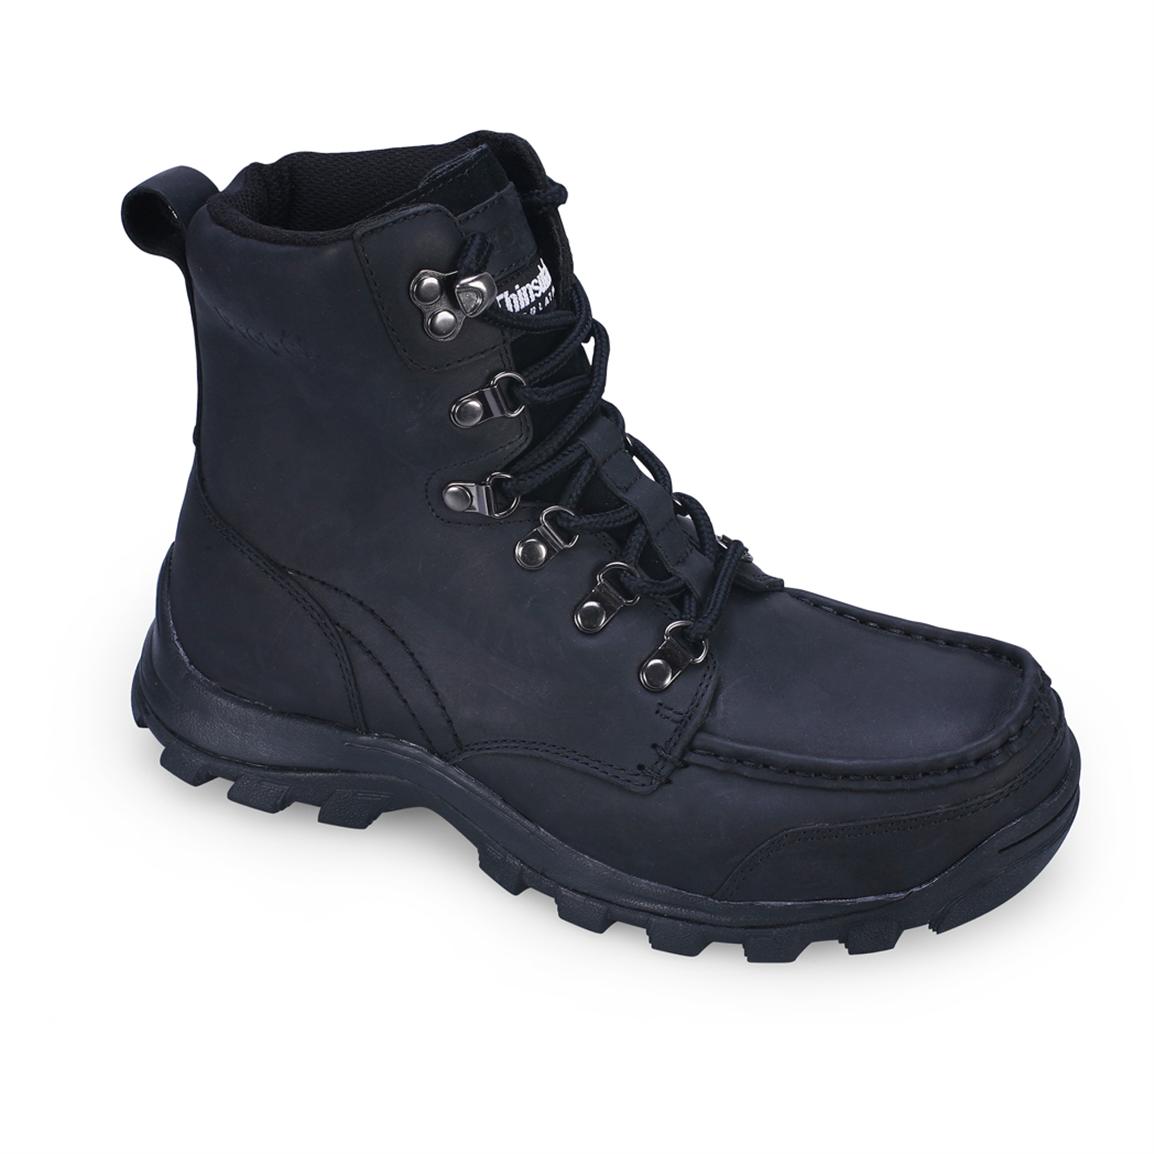 Insulated Hiking Boots 